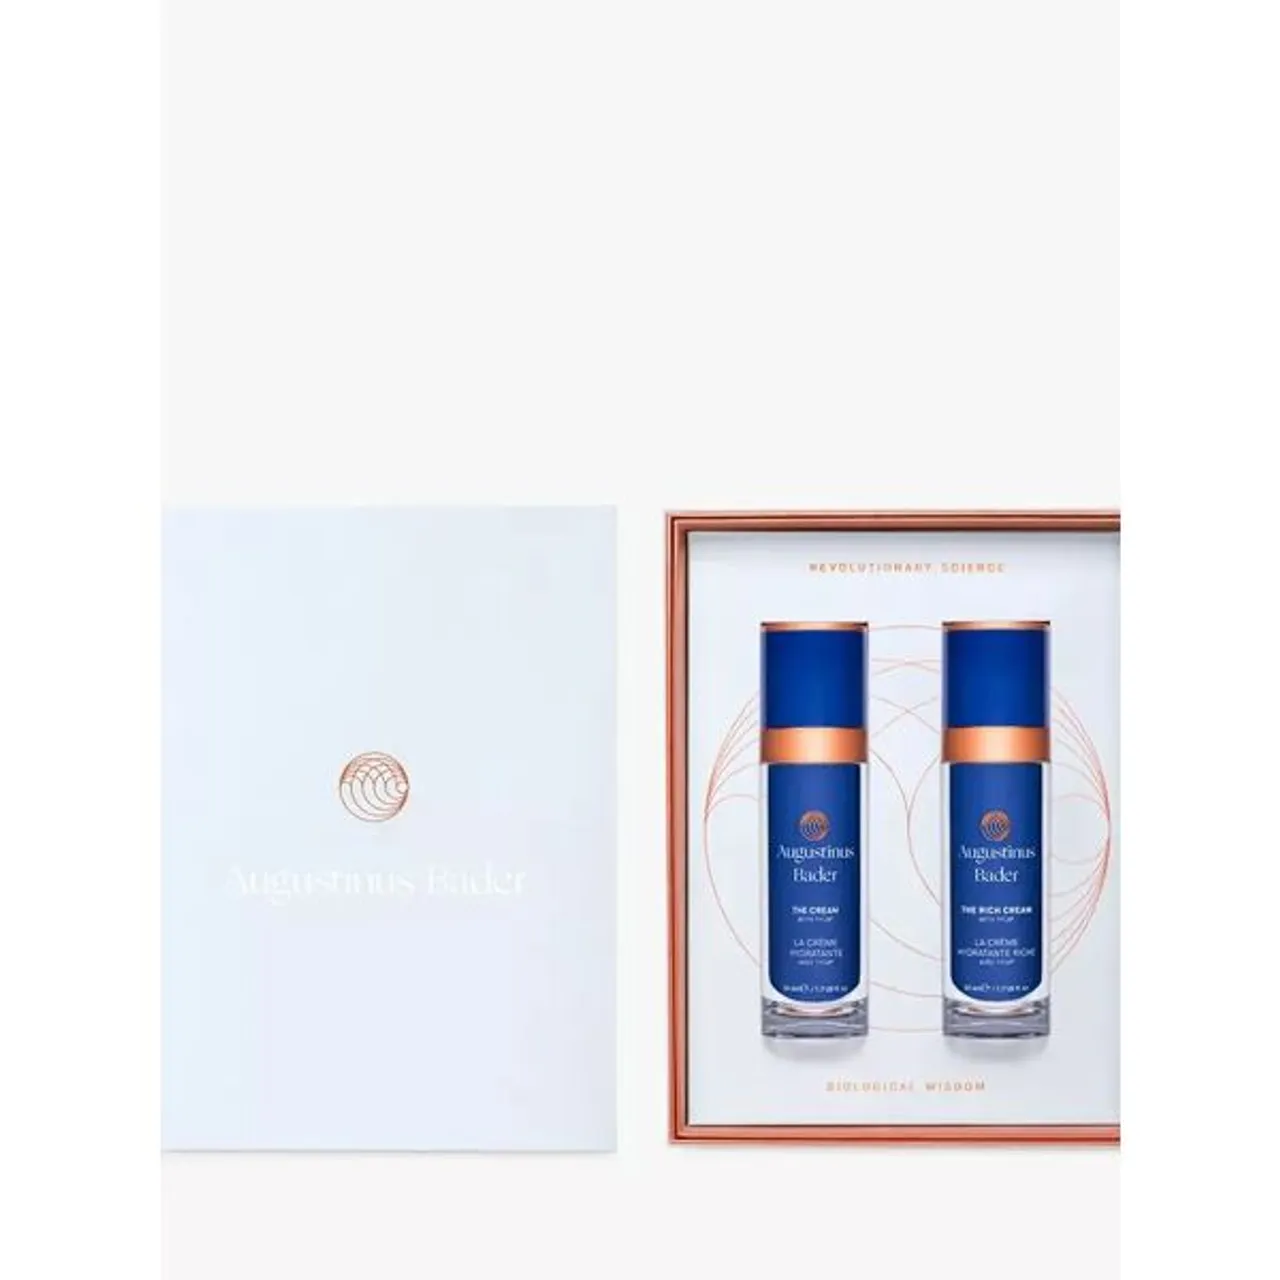 Augustinus Bader Discovery Duo Skincare Gift Set, 2 x 50ml - Unisex